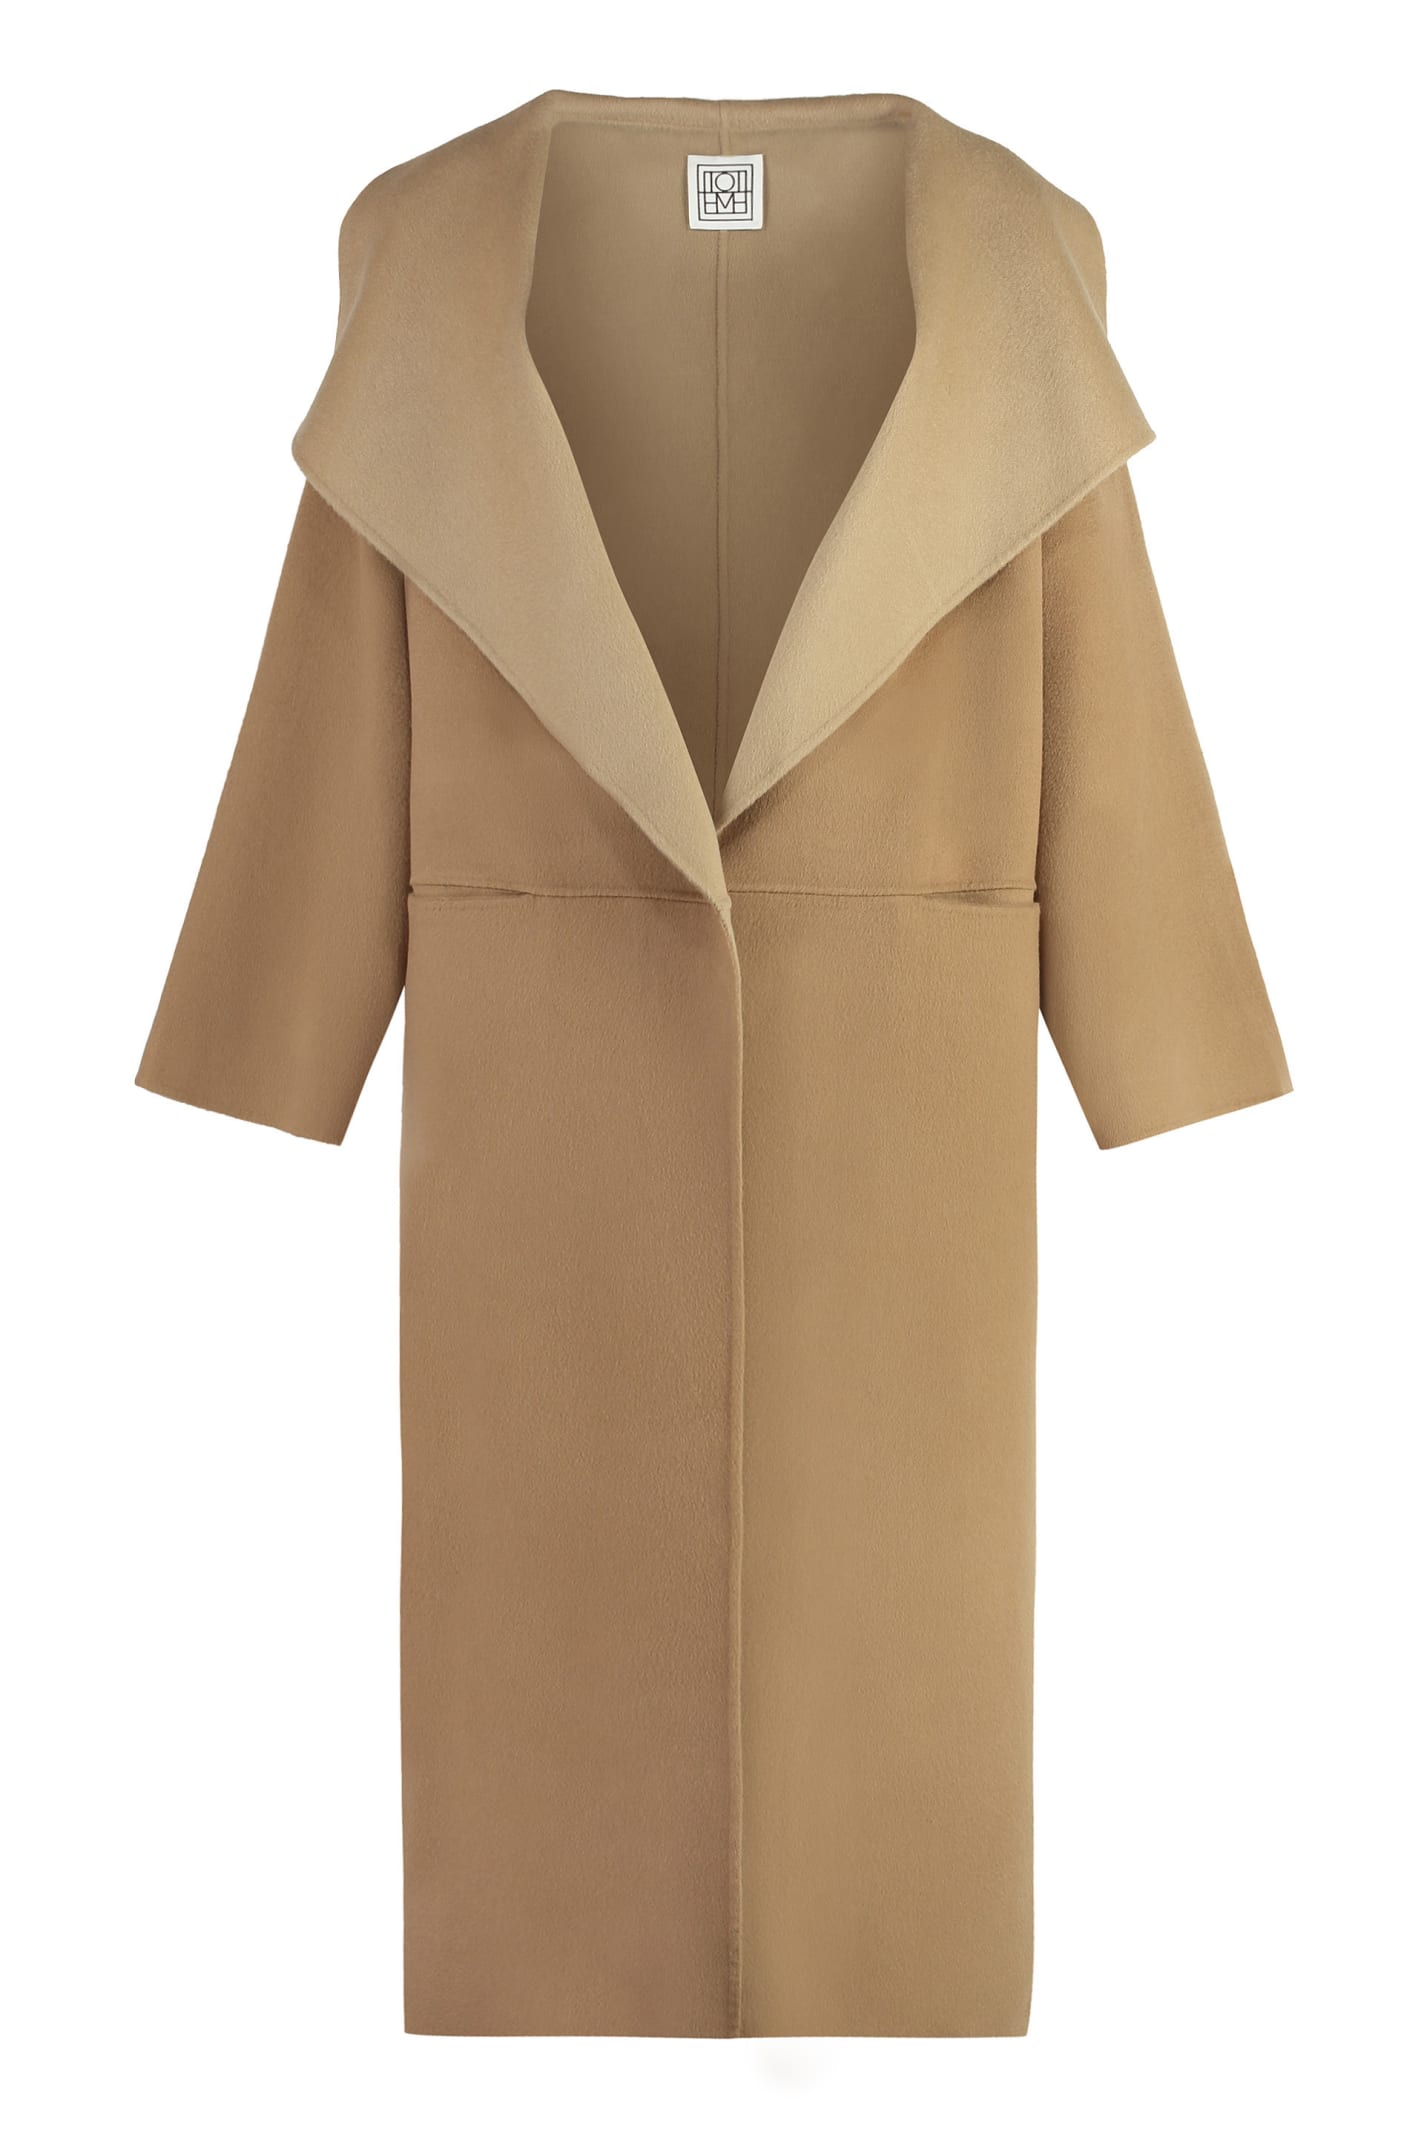 Totême Wool And Cashmere Coat